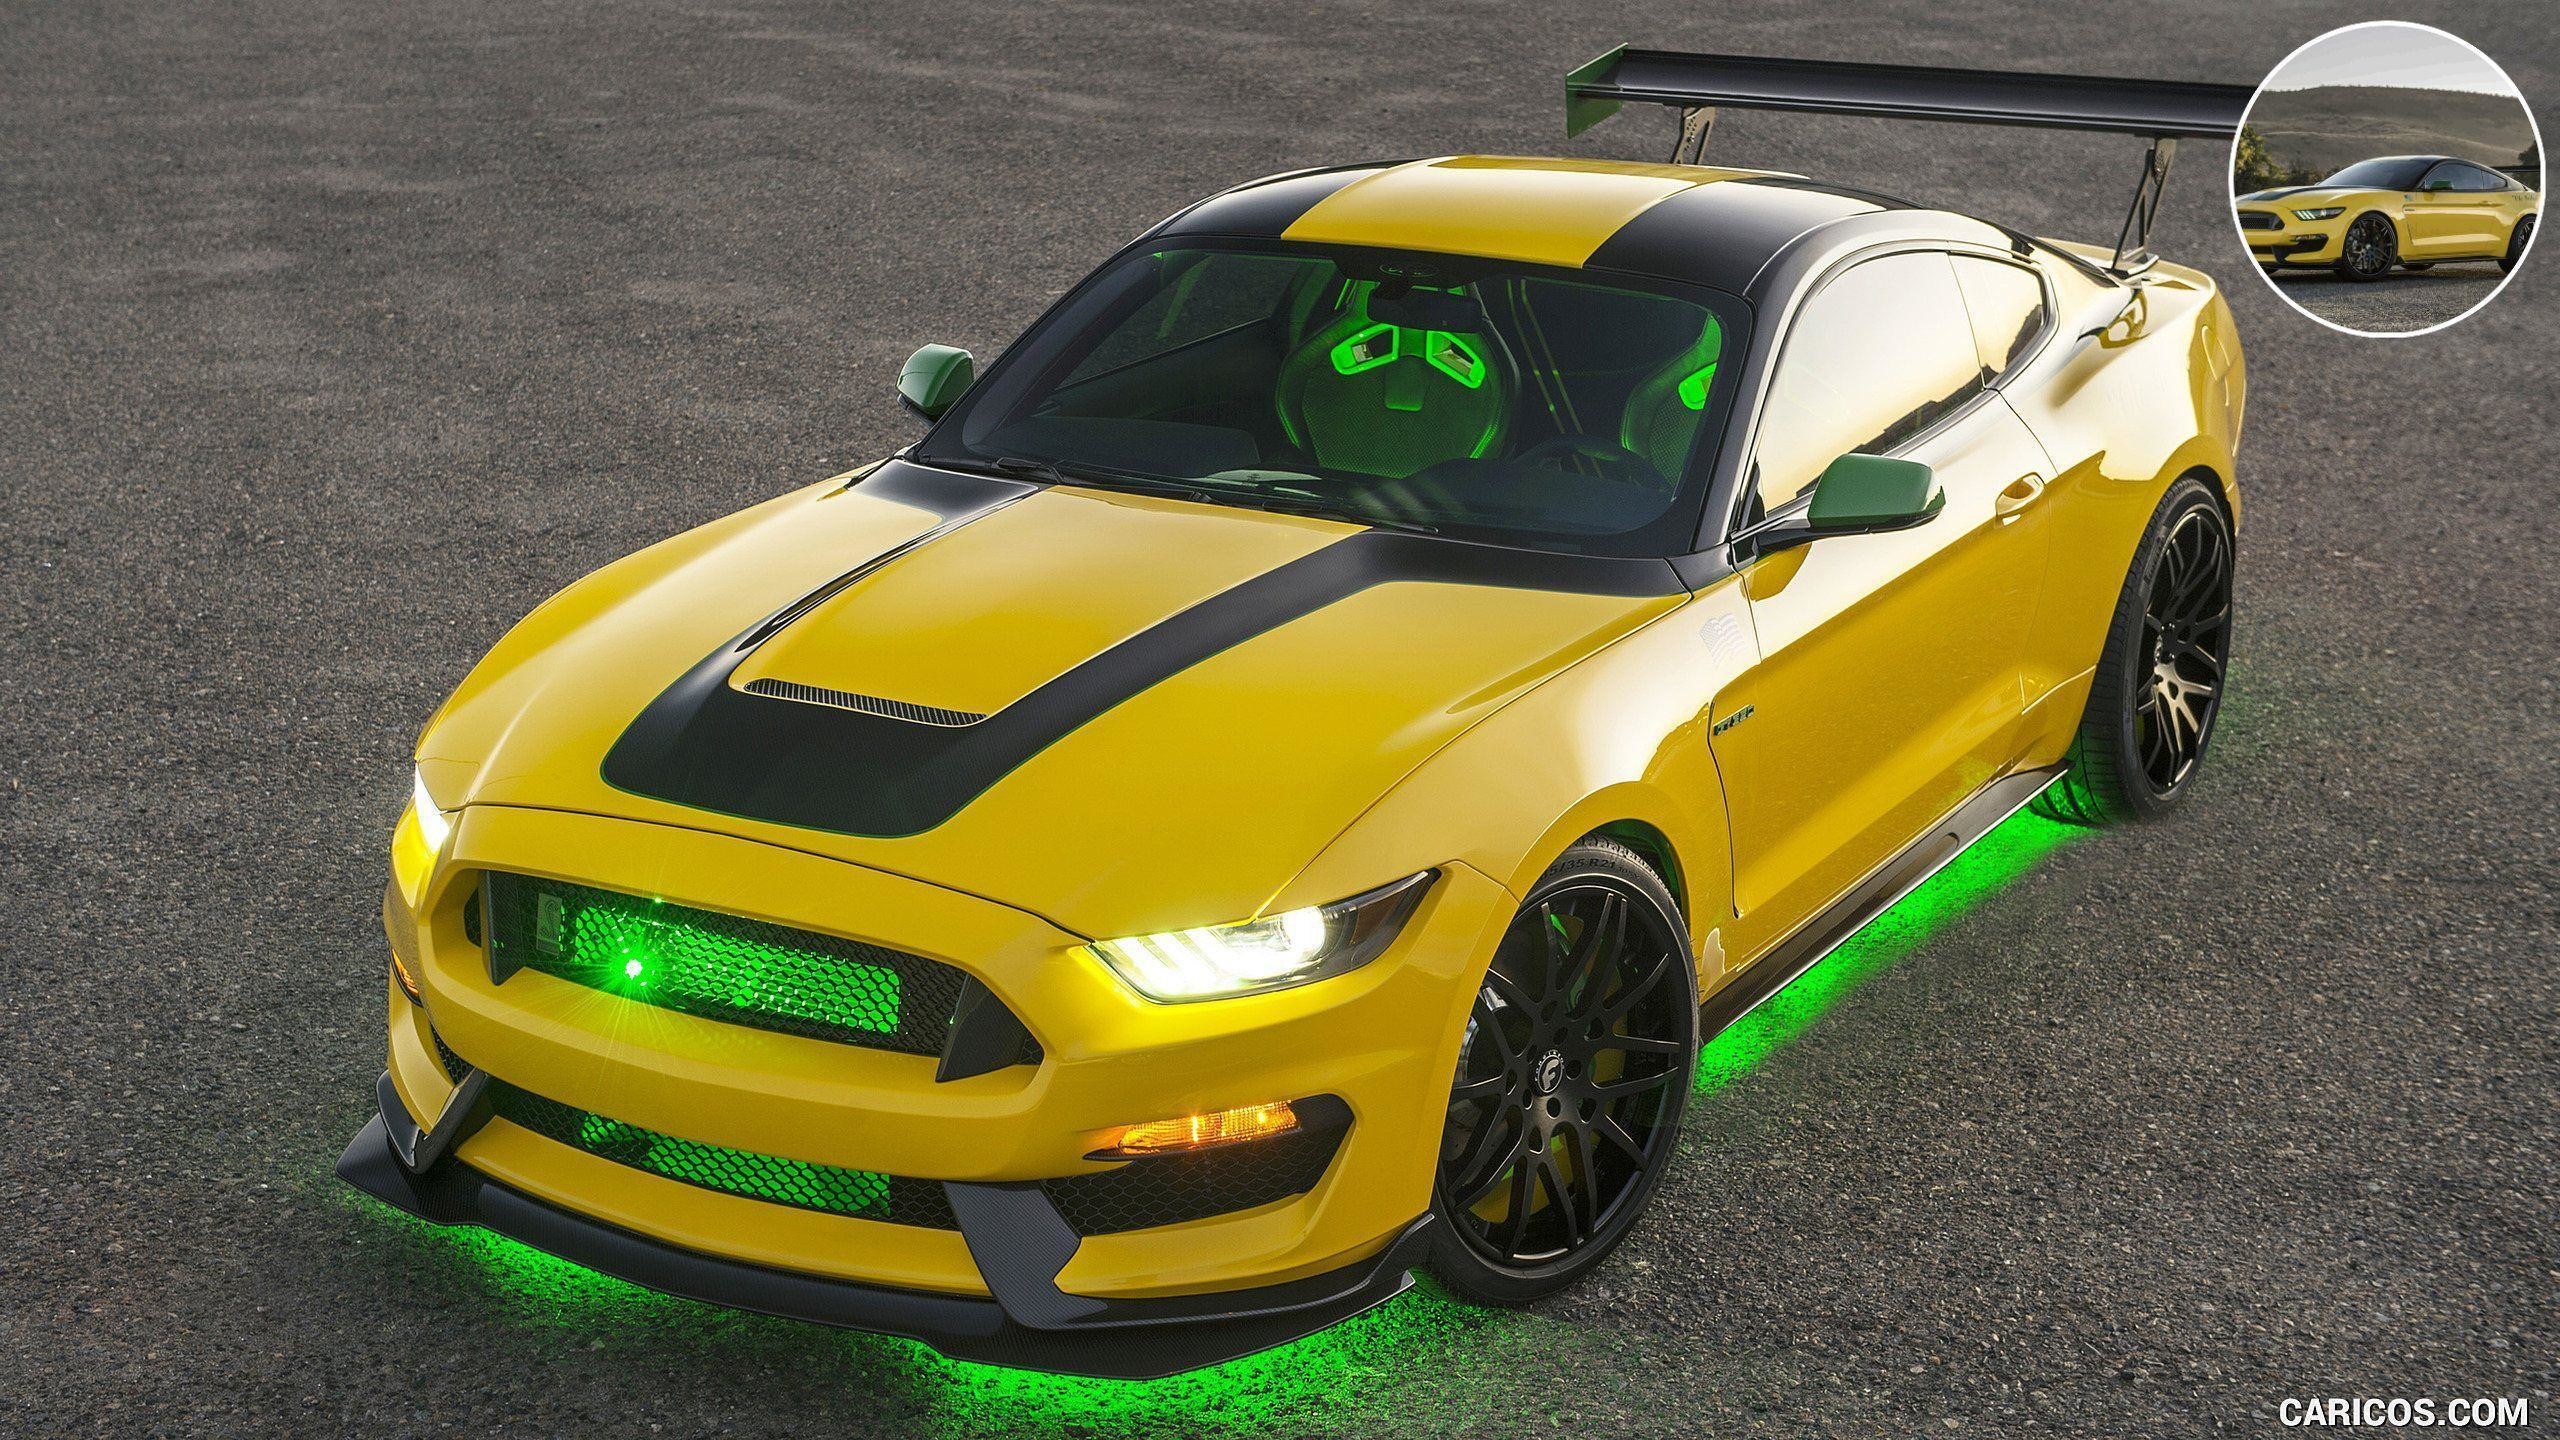 2560x1440 2017 Ford Mustang Shelby GT350 Ole Yeller | Caricos.com